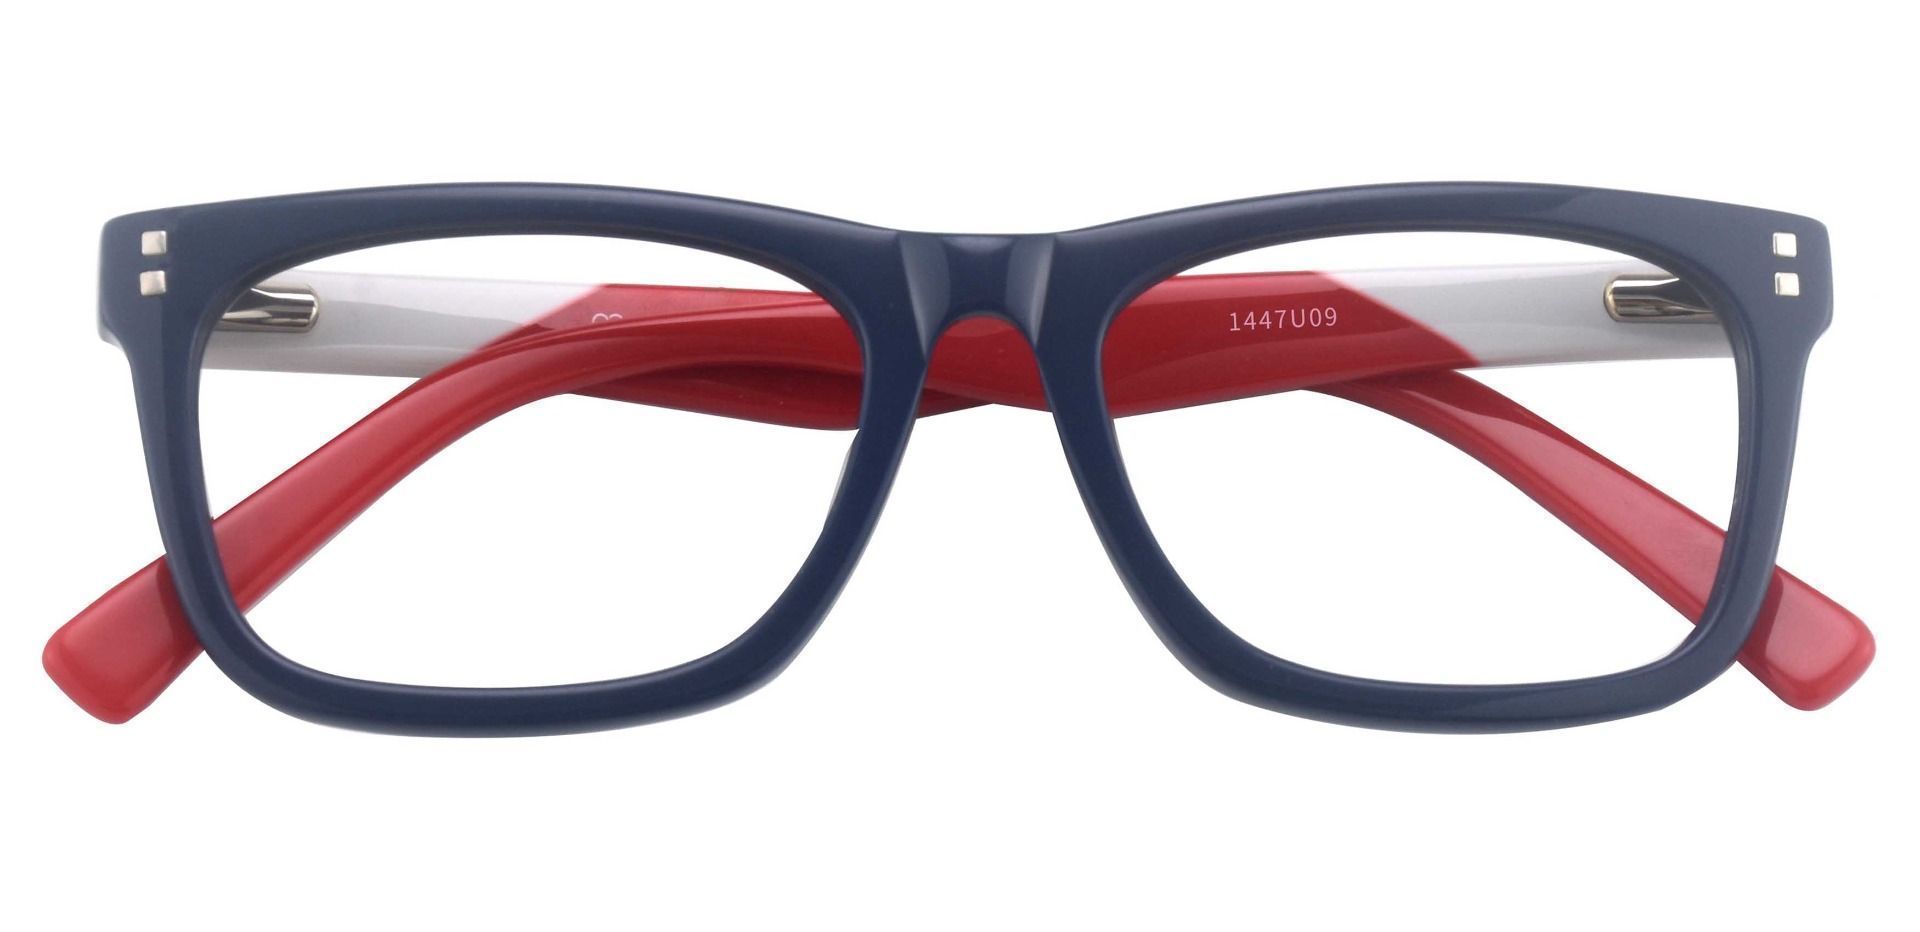 Harbor Rectangle Non-Rx Glasses - The Frame Is Blue And Red